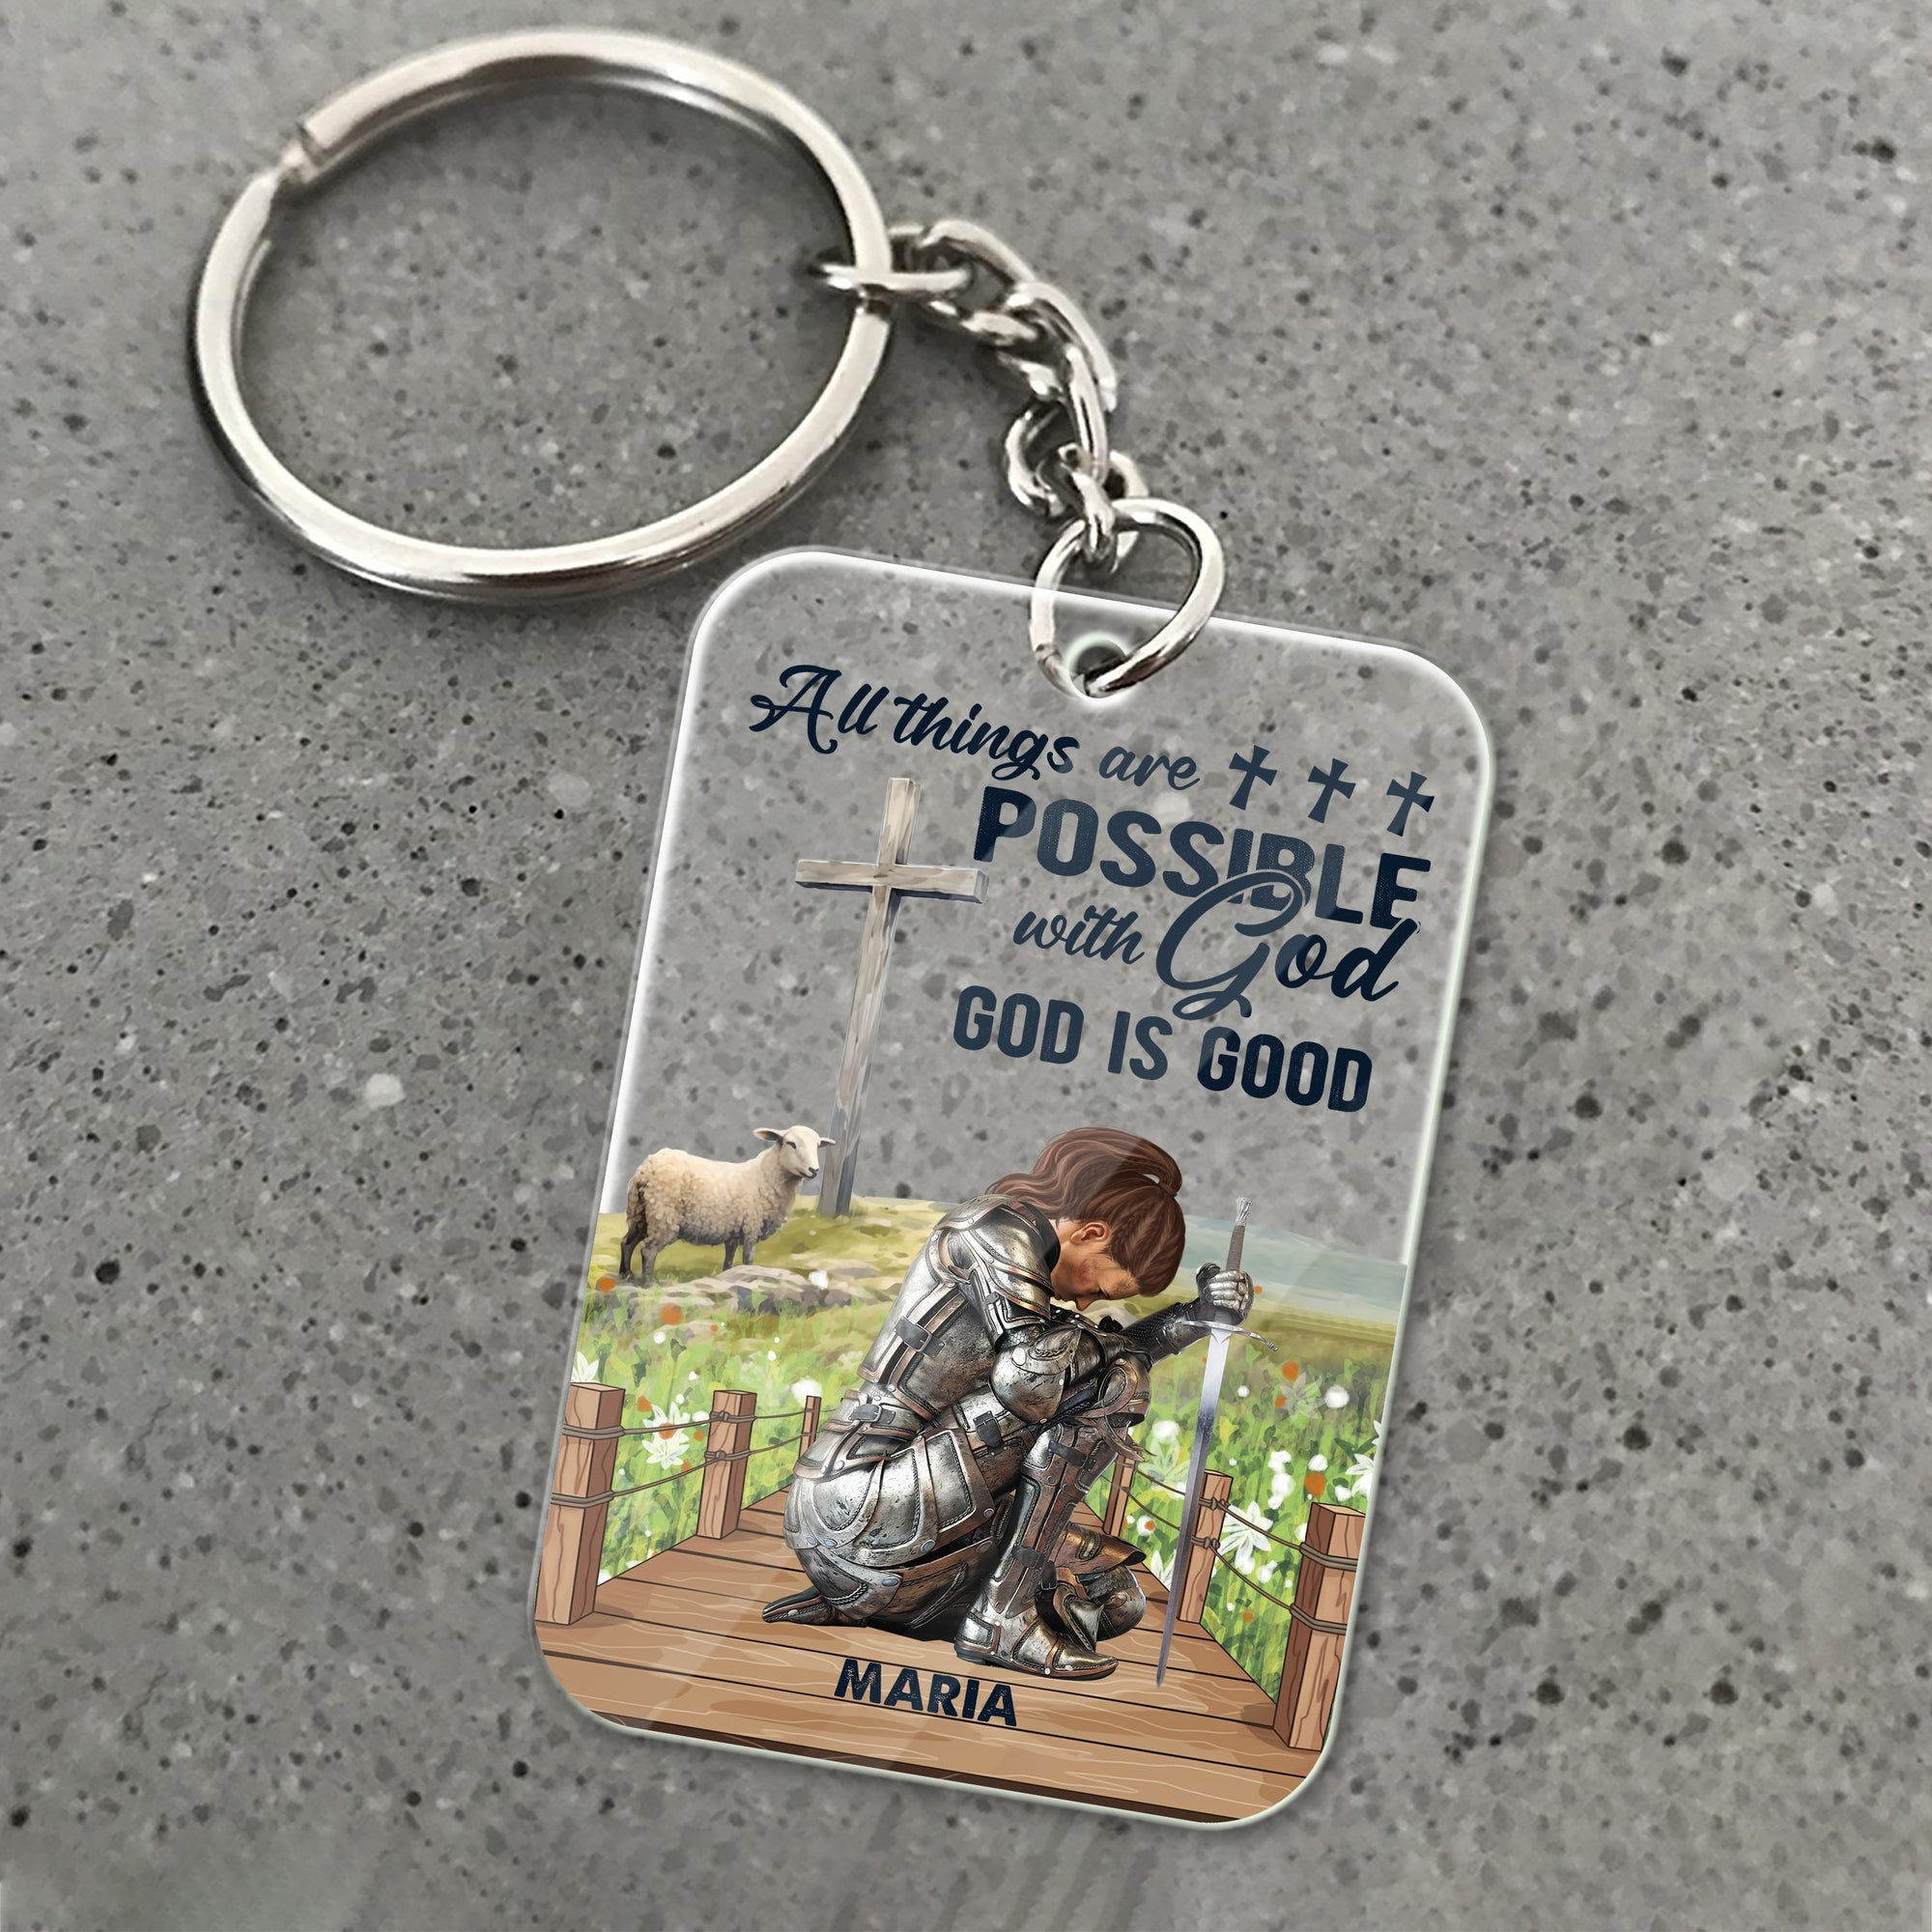 Personalized Warrior Of God All Things Are Possible With God, God Is Good Matthew 19:26 Acrylic Keychain